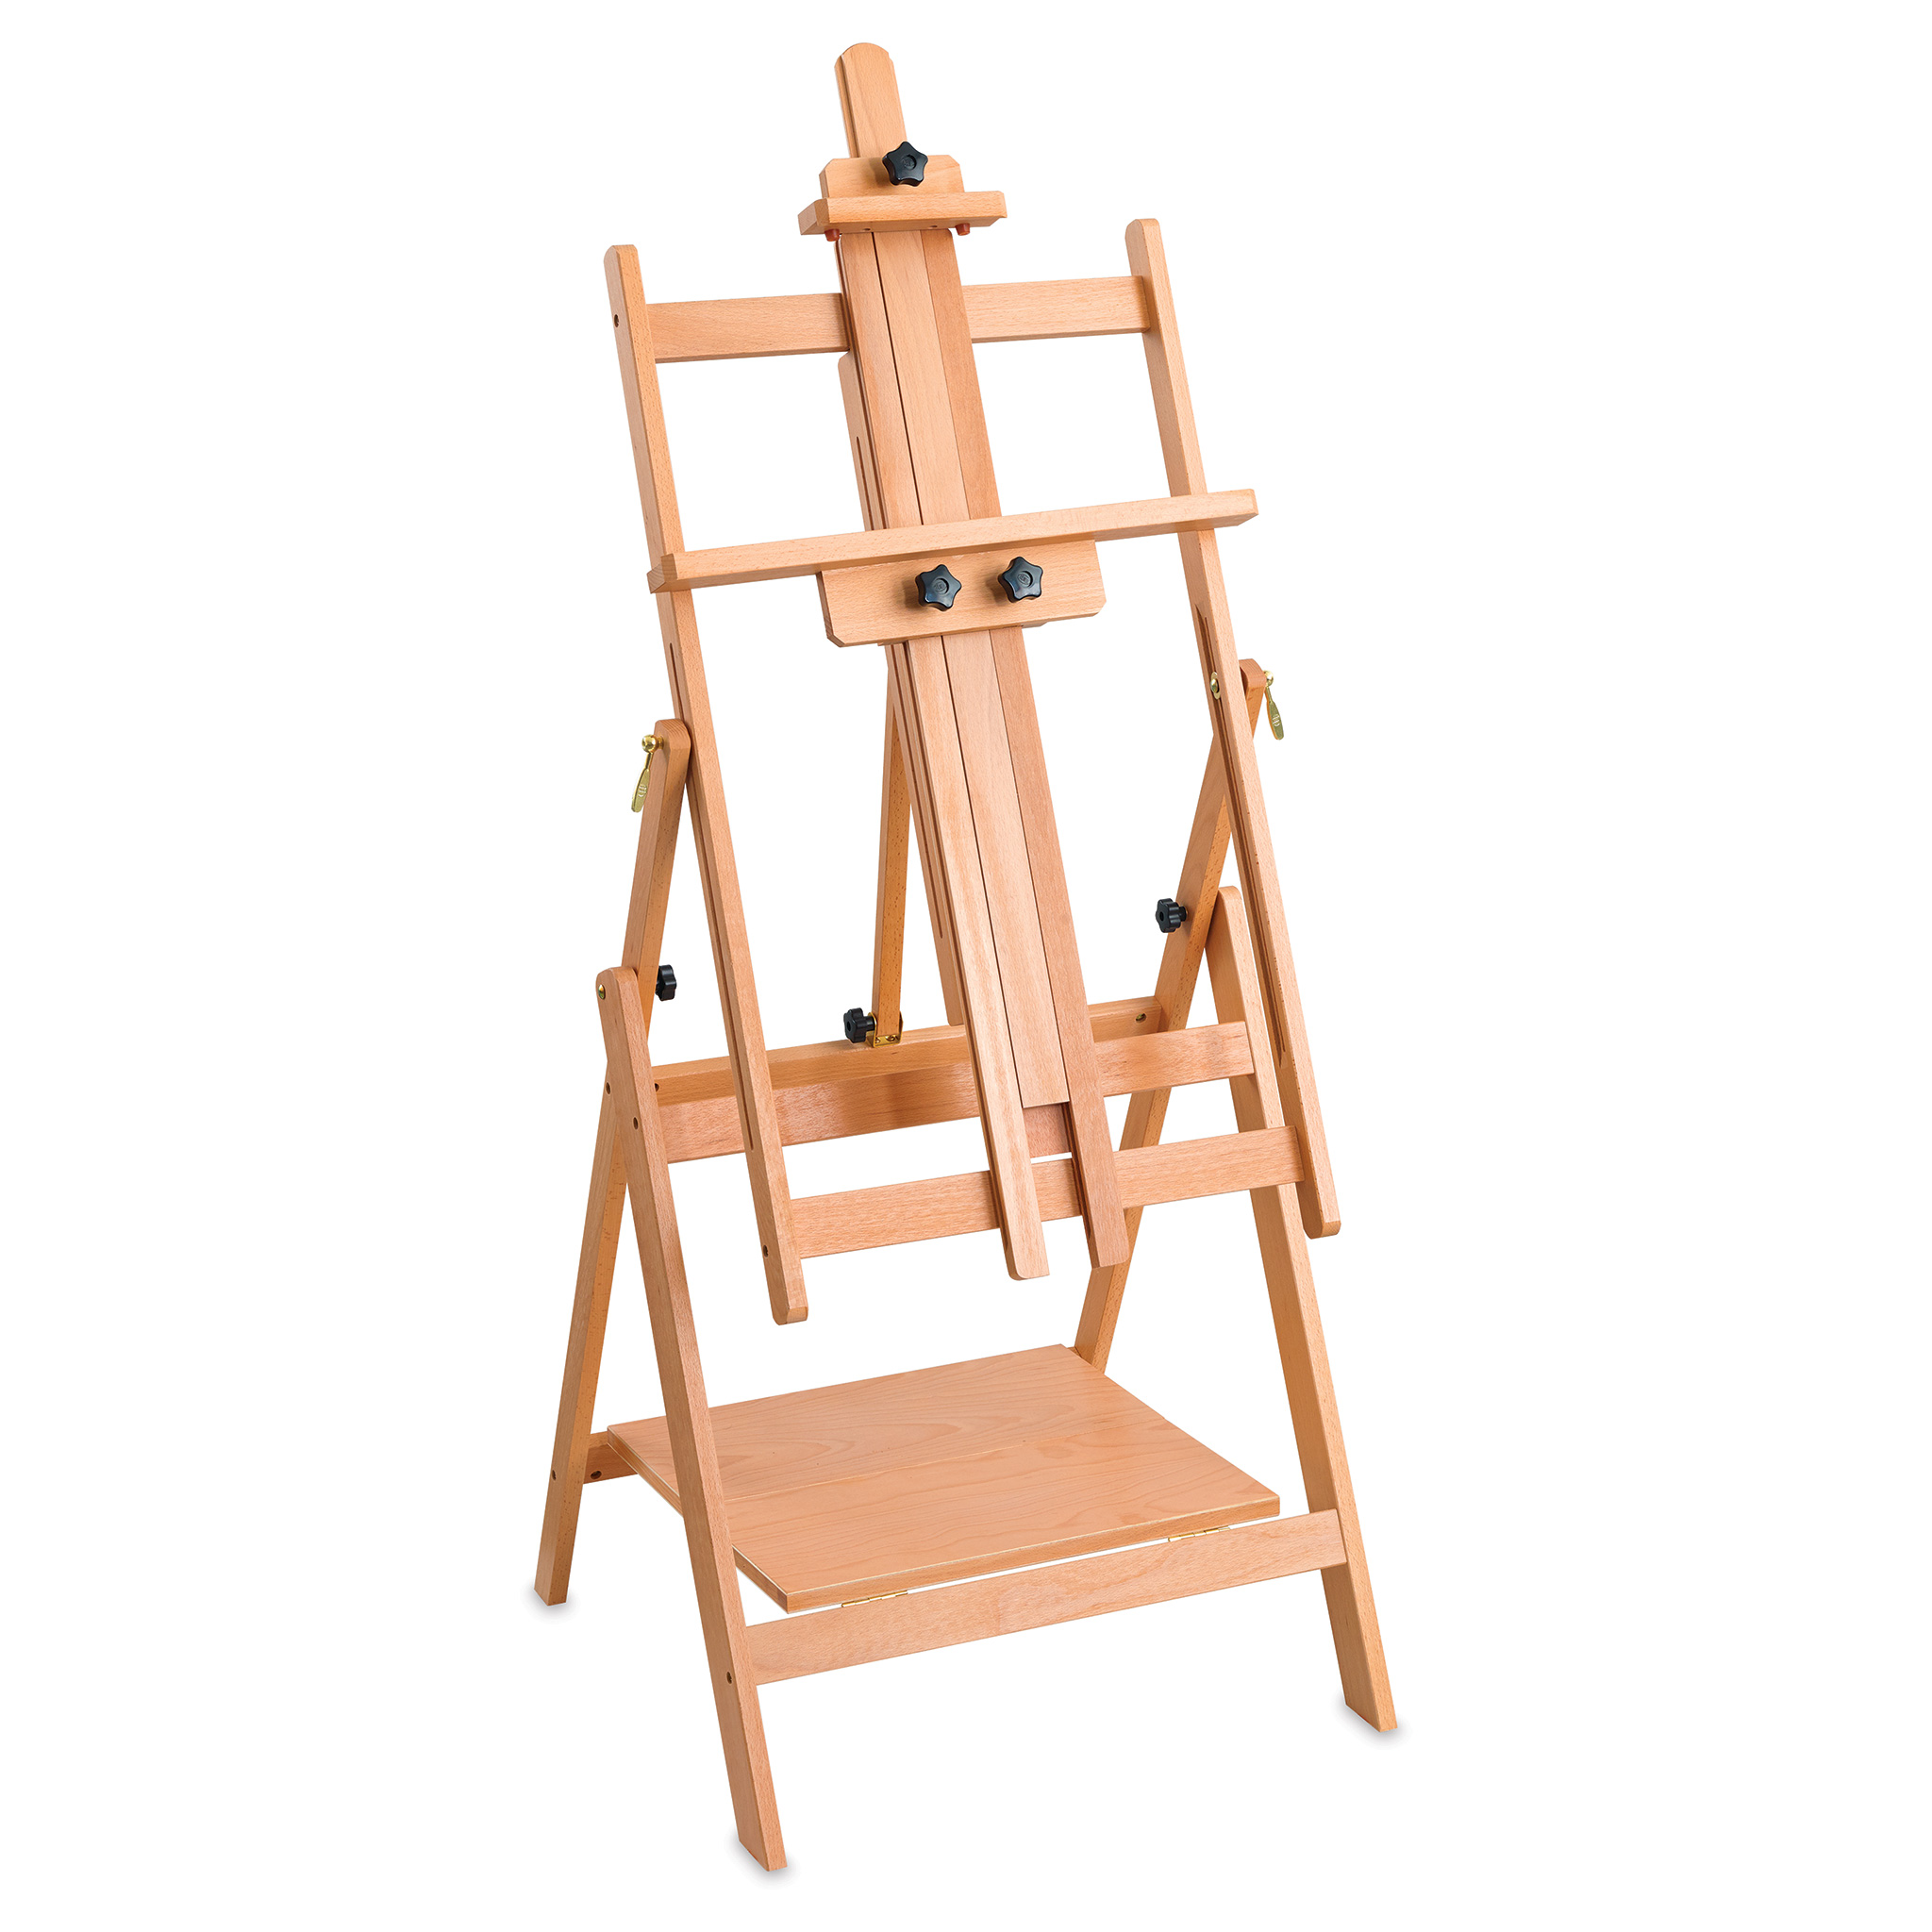 Blick Studio Book Stand Easel